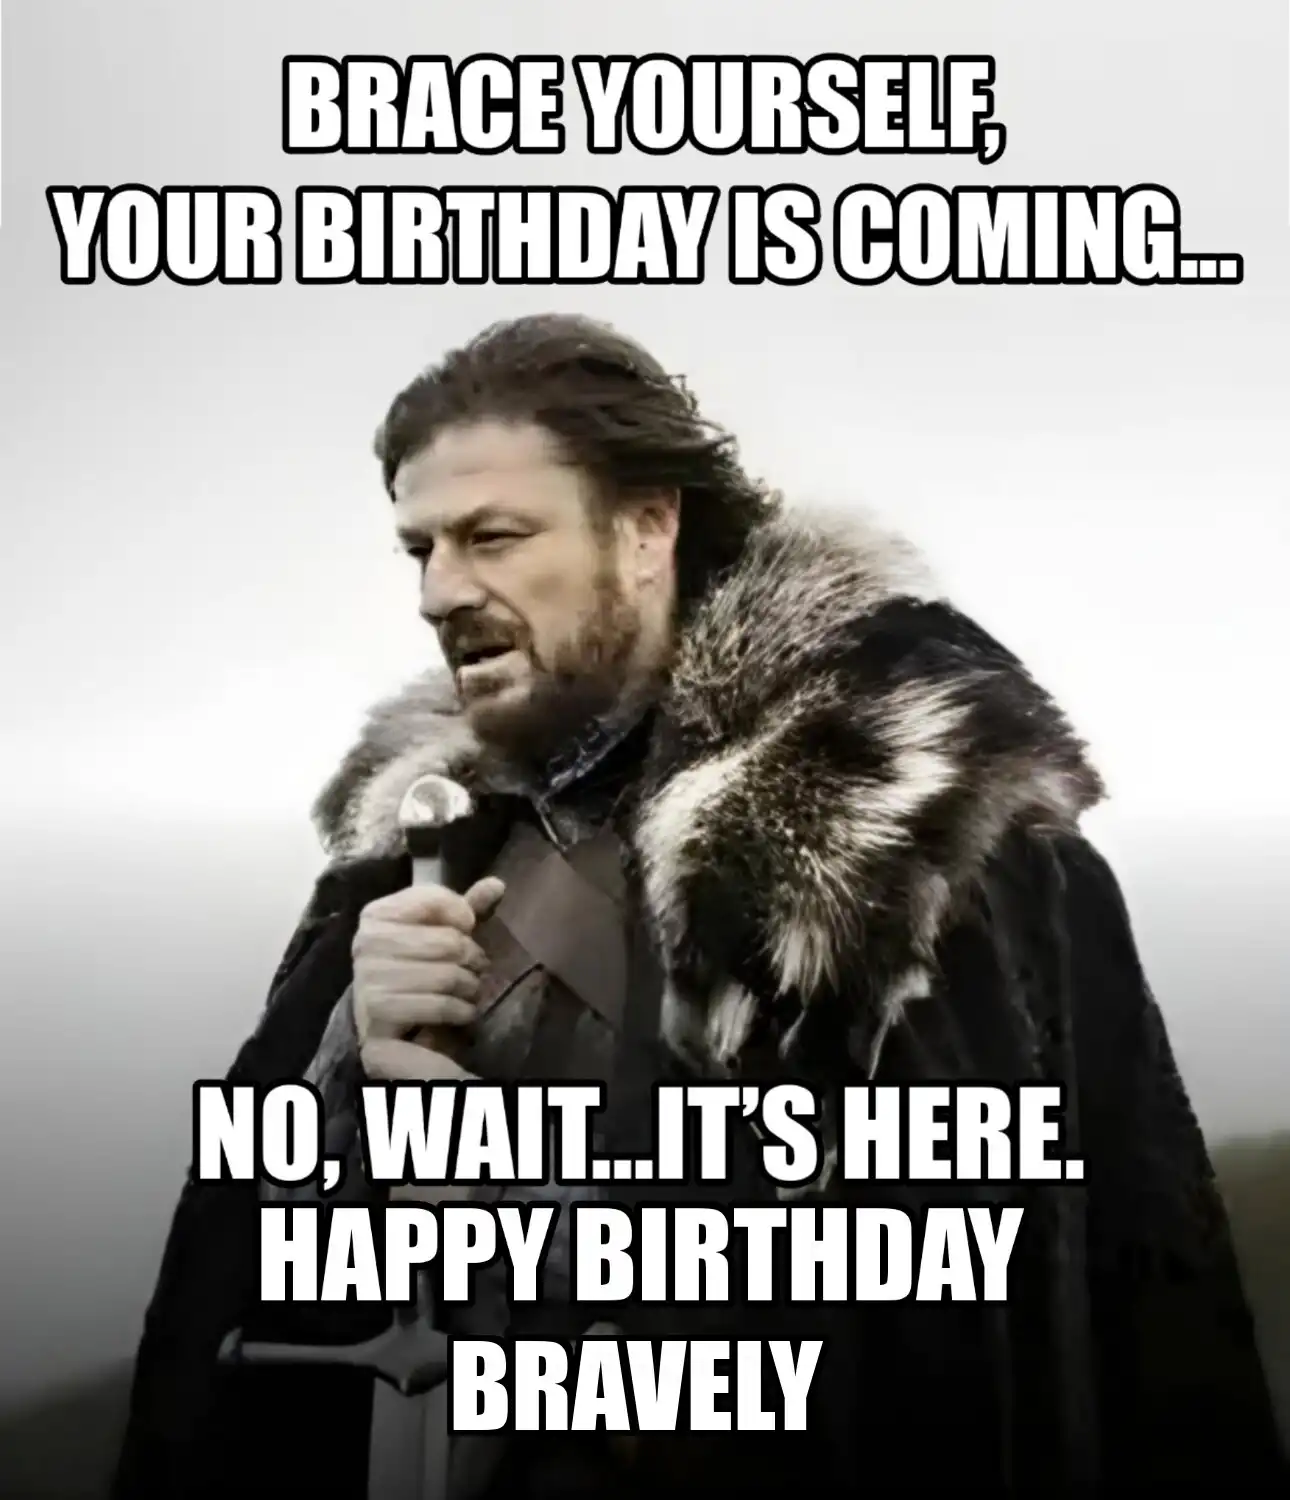 Happy Birthday Bravely Brace Yourself Your Birthday Is Coming Meme